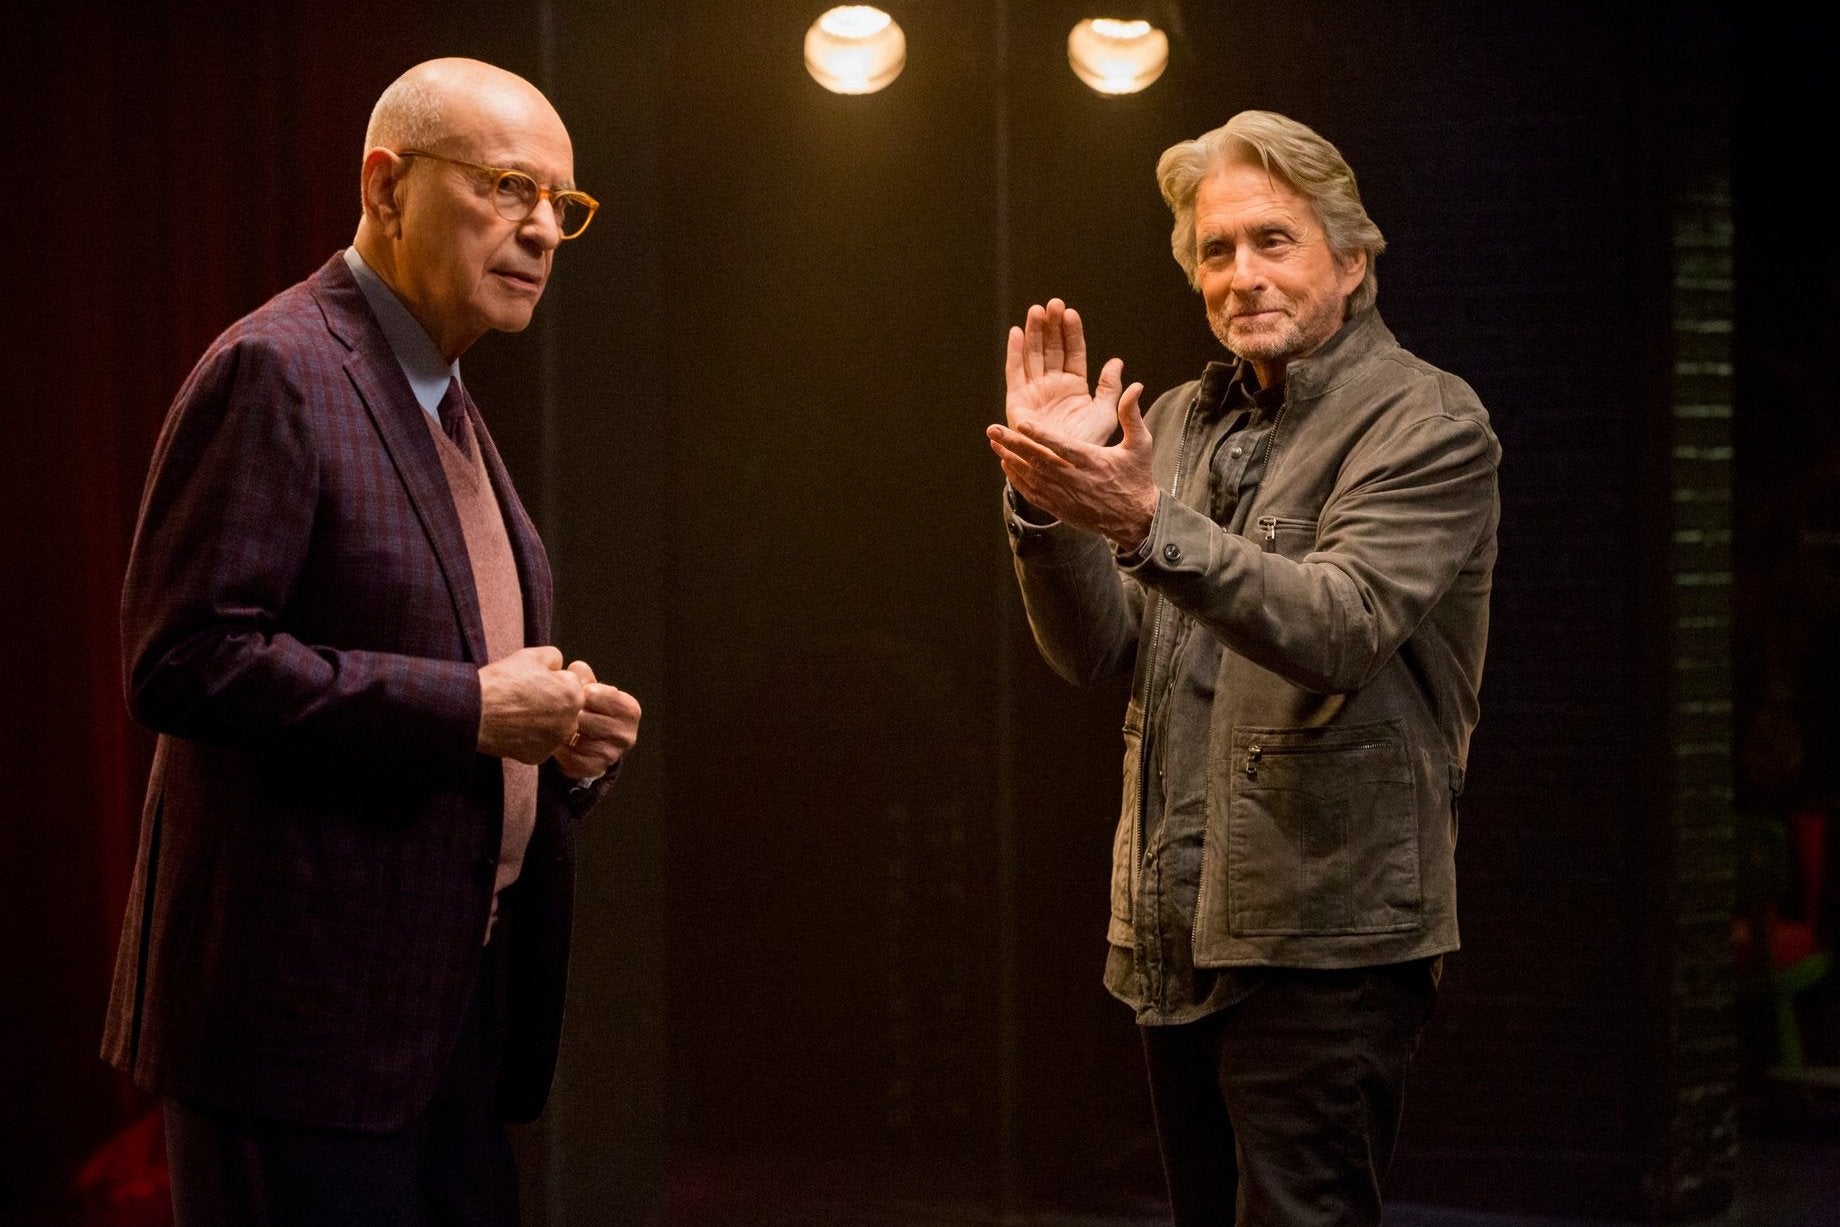 Best Television Series - Musical or Comedy: The Kominsky Method